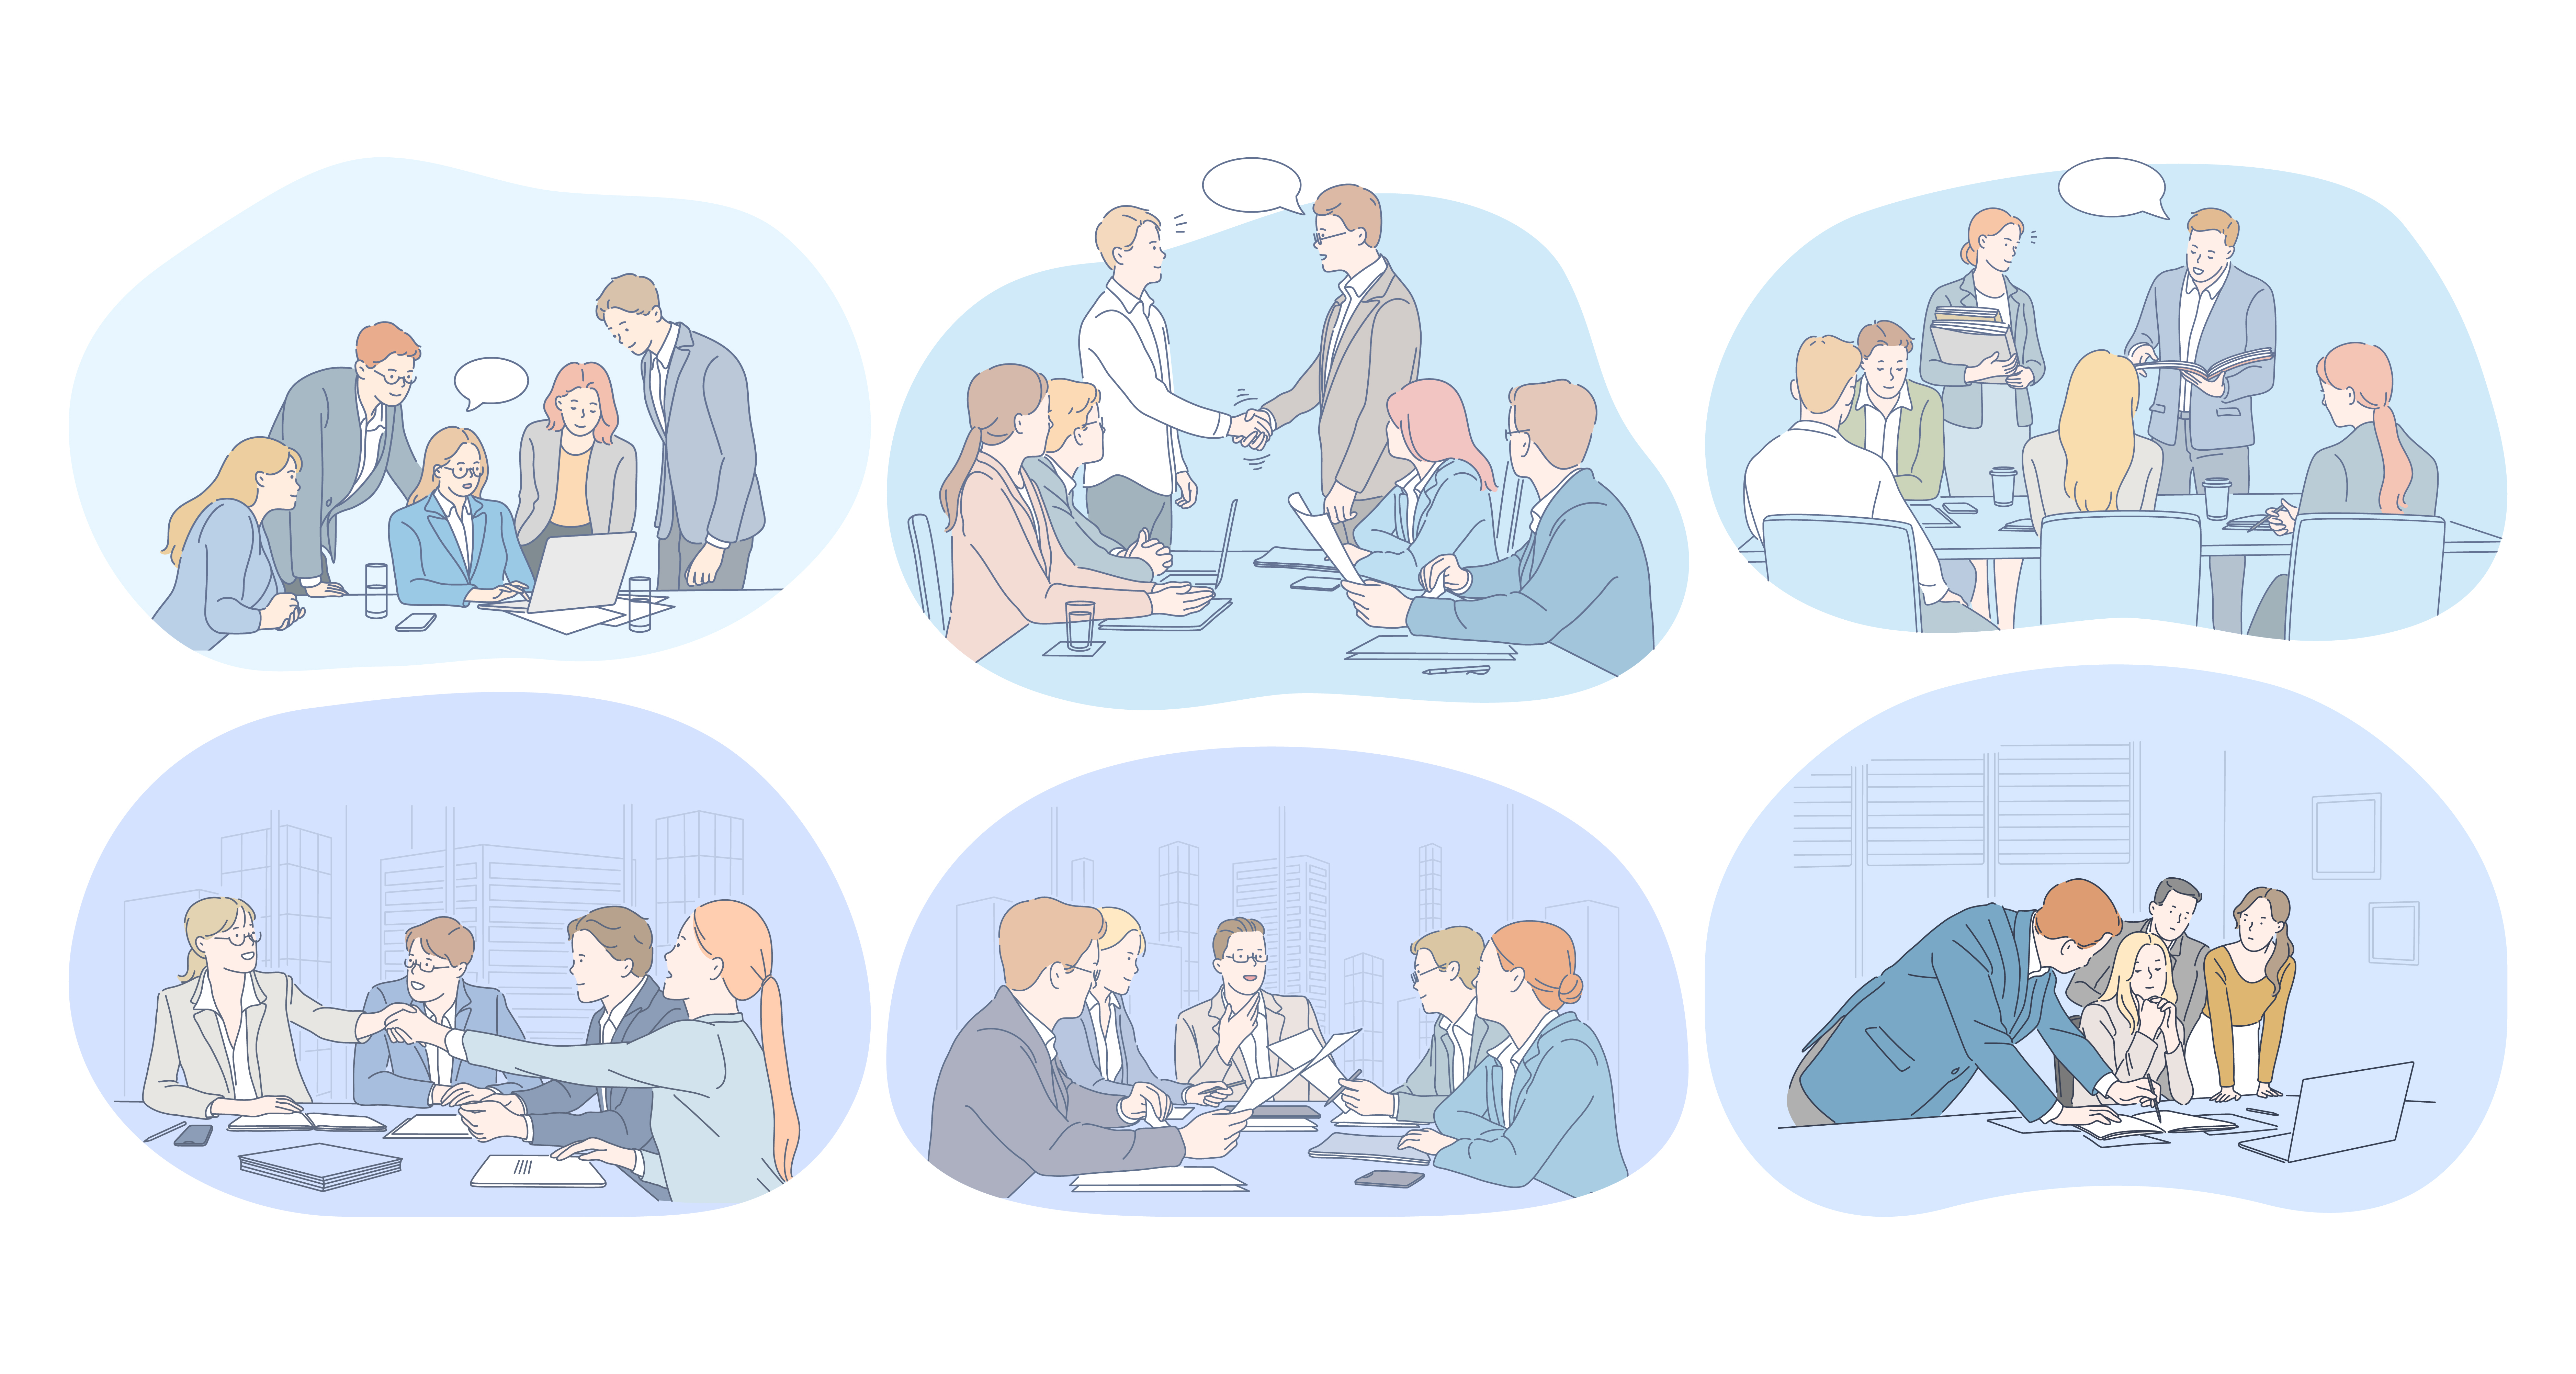 Teamwork, brainstorming, negotiations, agreement, deal, presentation concept. Business people office workers discussing projects together, having brainstorming, making presentation for partners . Teamwork, brainstorming, negotiations, agreement, deal, presentation concept